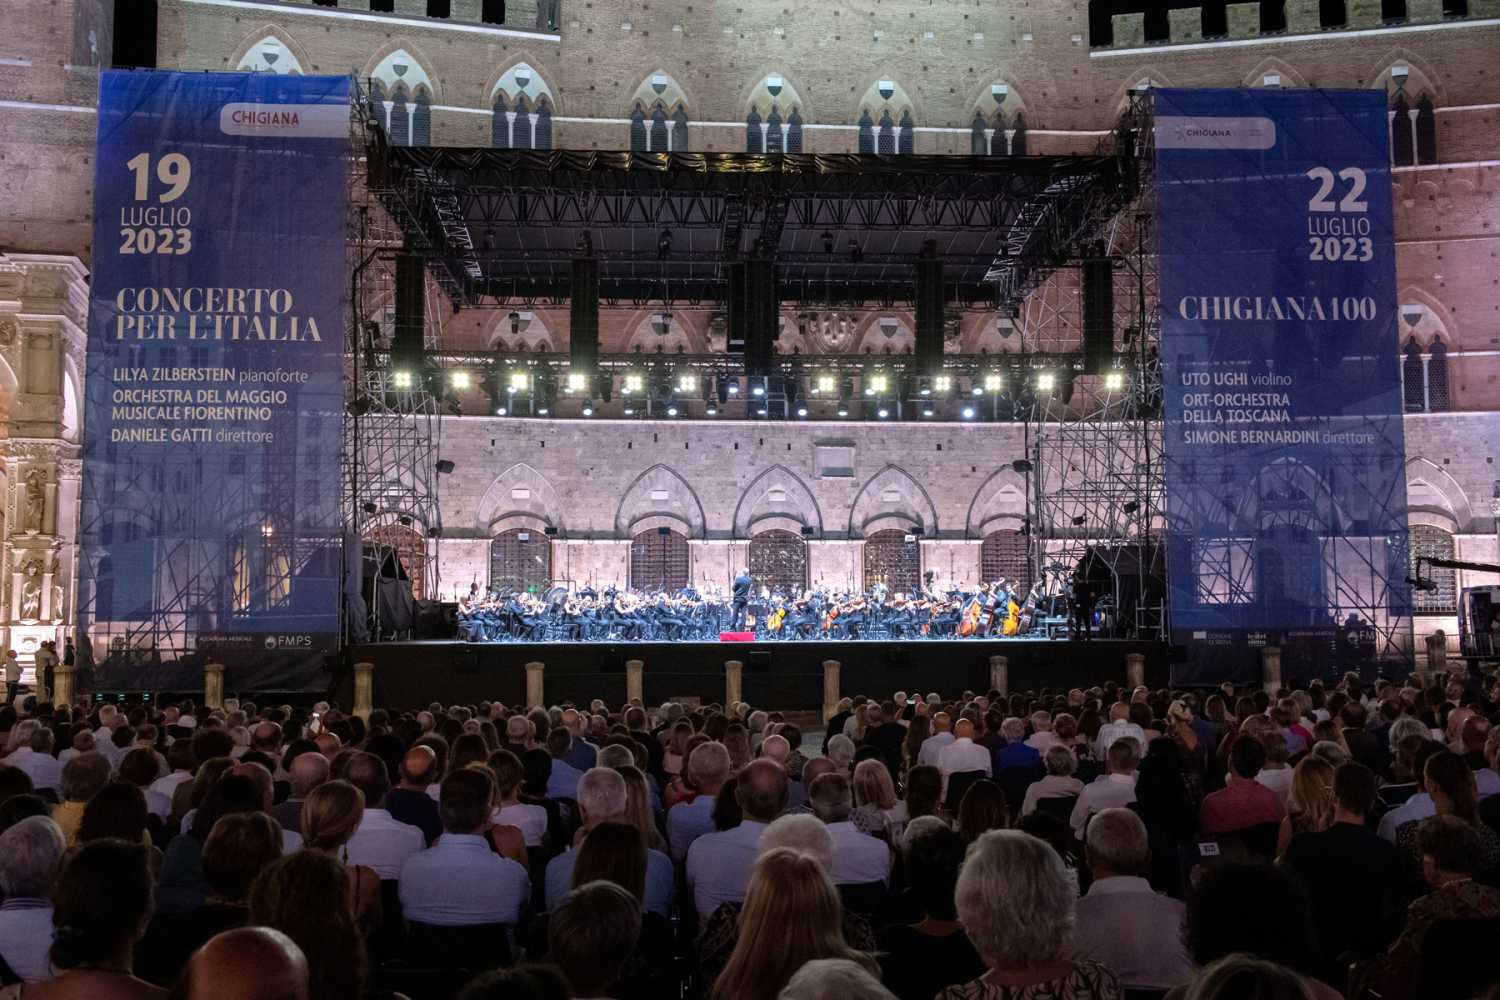 Piazza del Campo hosts various events, from seasonal initiatives to music festivals, throughout the year